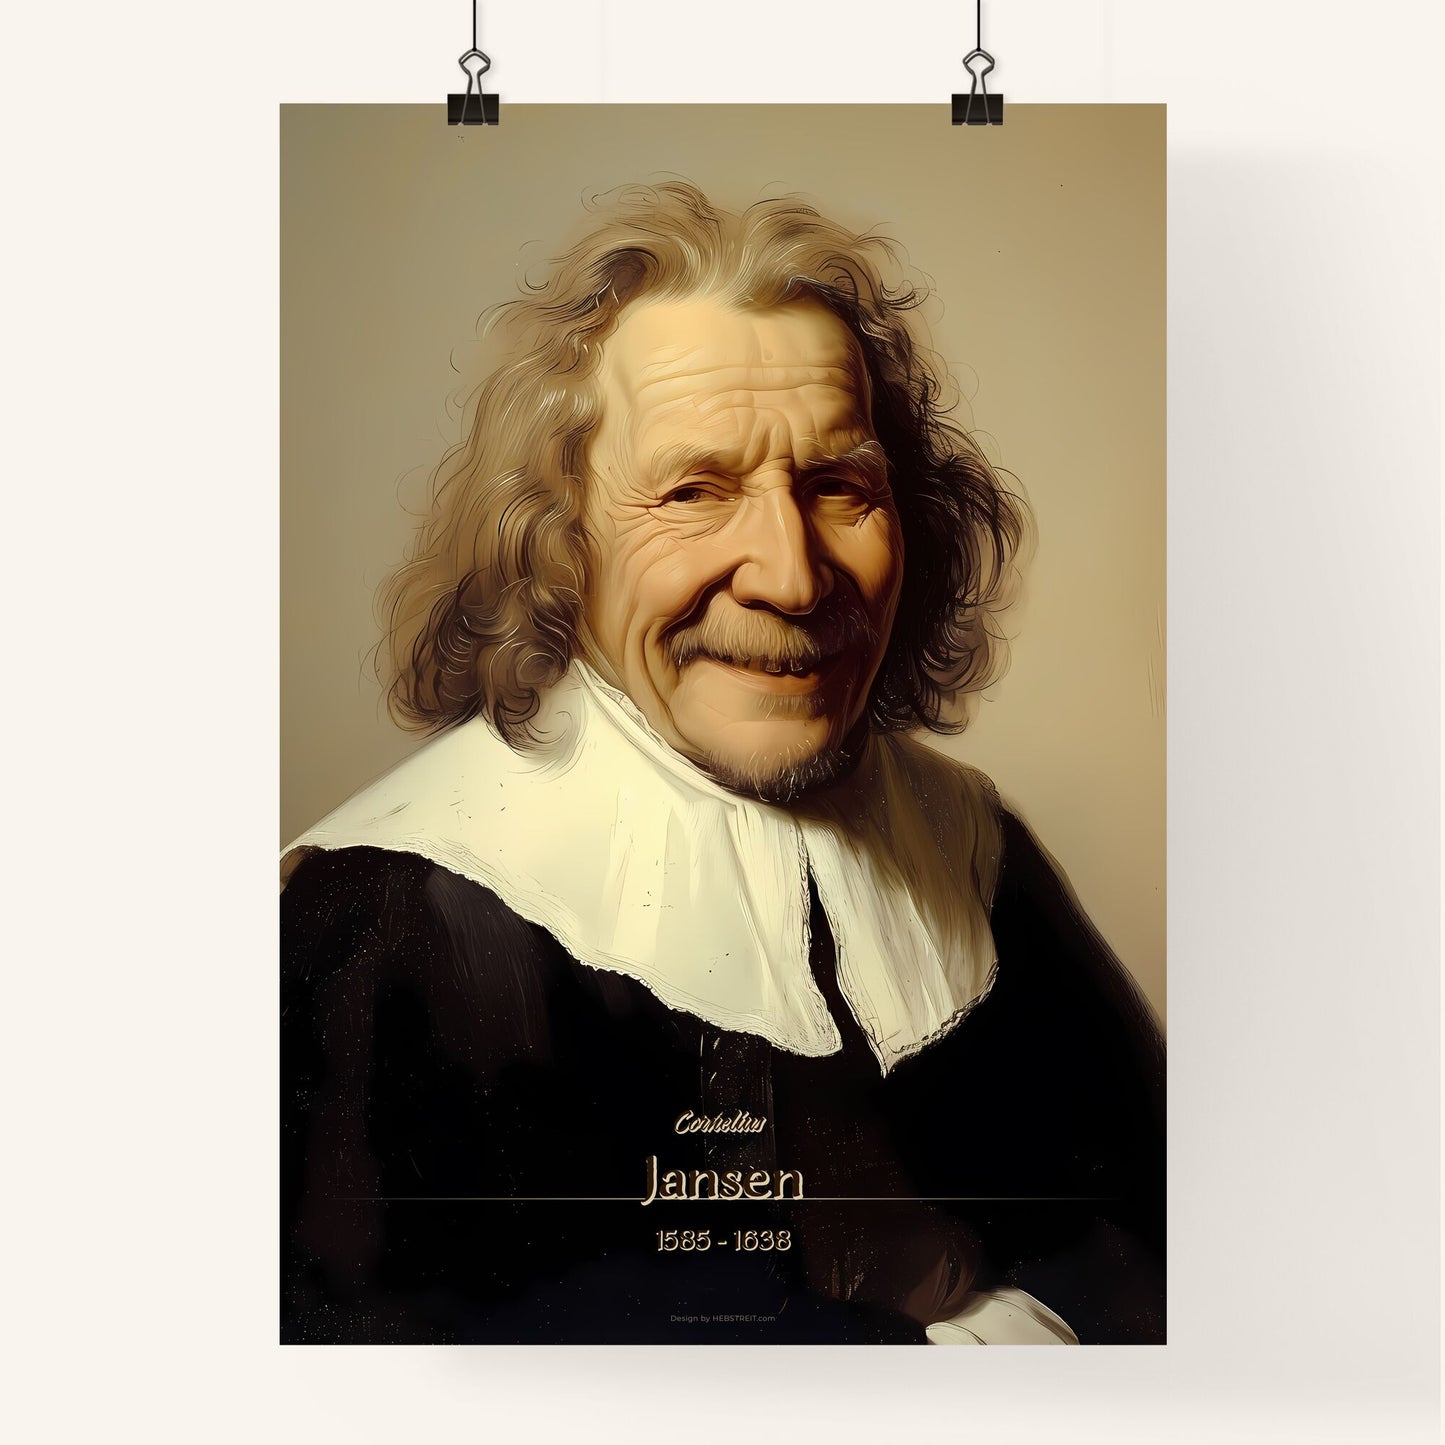 Cornelius, Jansen, 1585 - 1638, A Poster of a man with long hair and a white collar Default Title